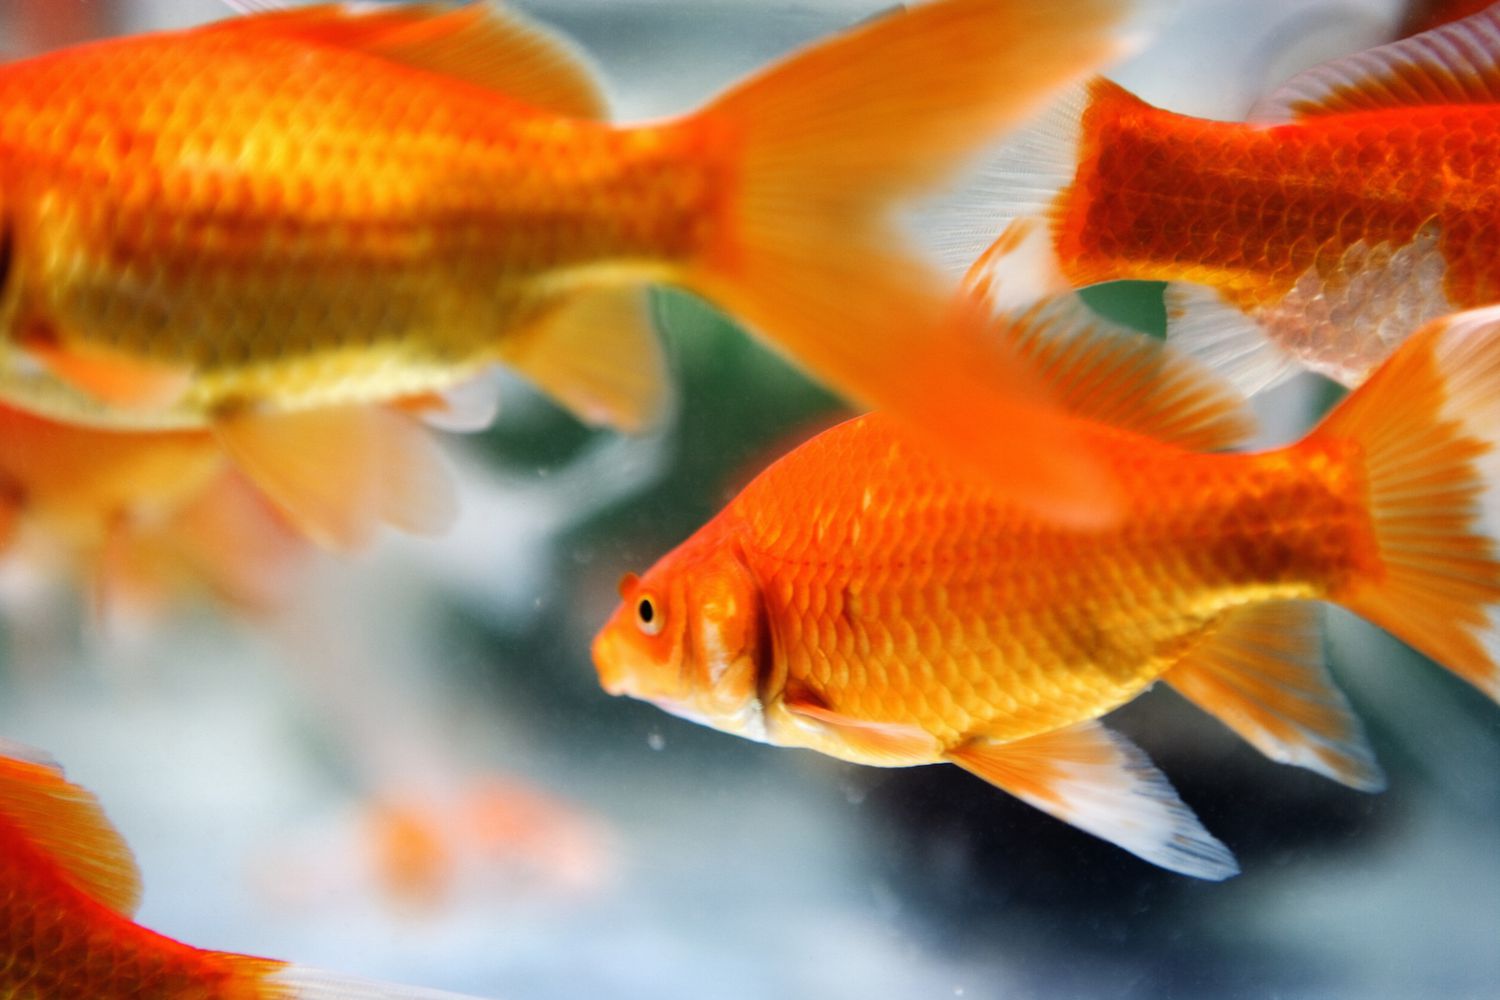 A close-up of some goldfish